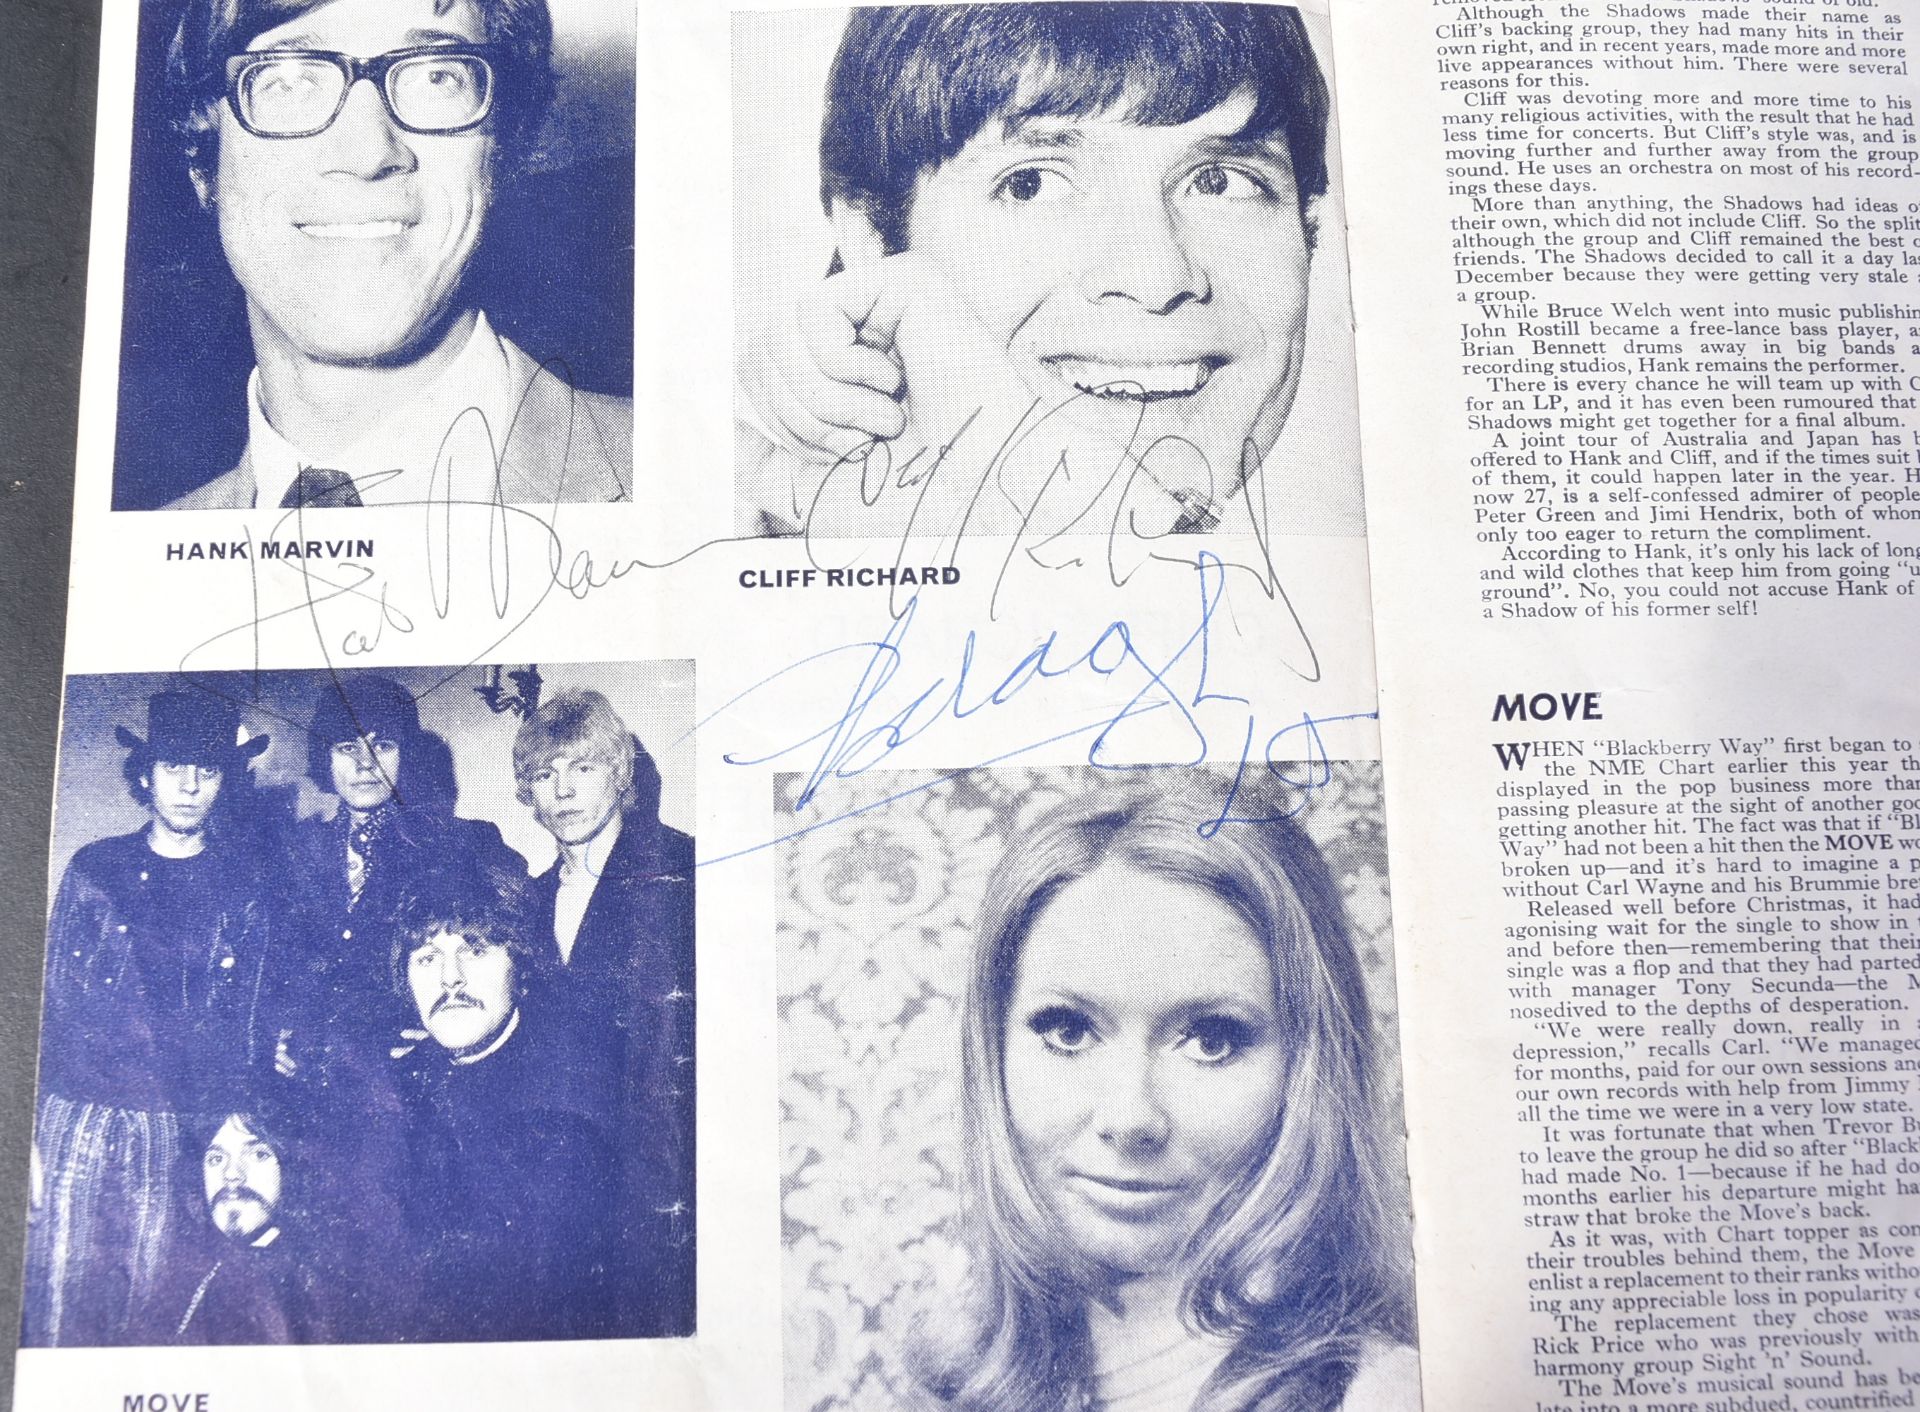 NME POLL-WINNERS ALL-STAR CONCERT 1968 - SIGNED PROGRAMME - Image 3 of 5